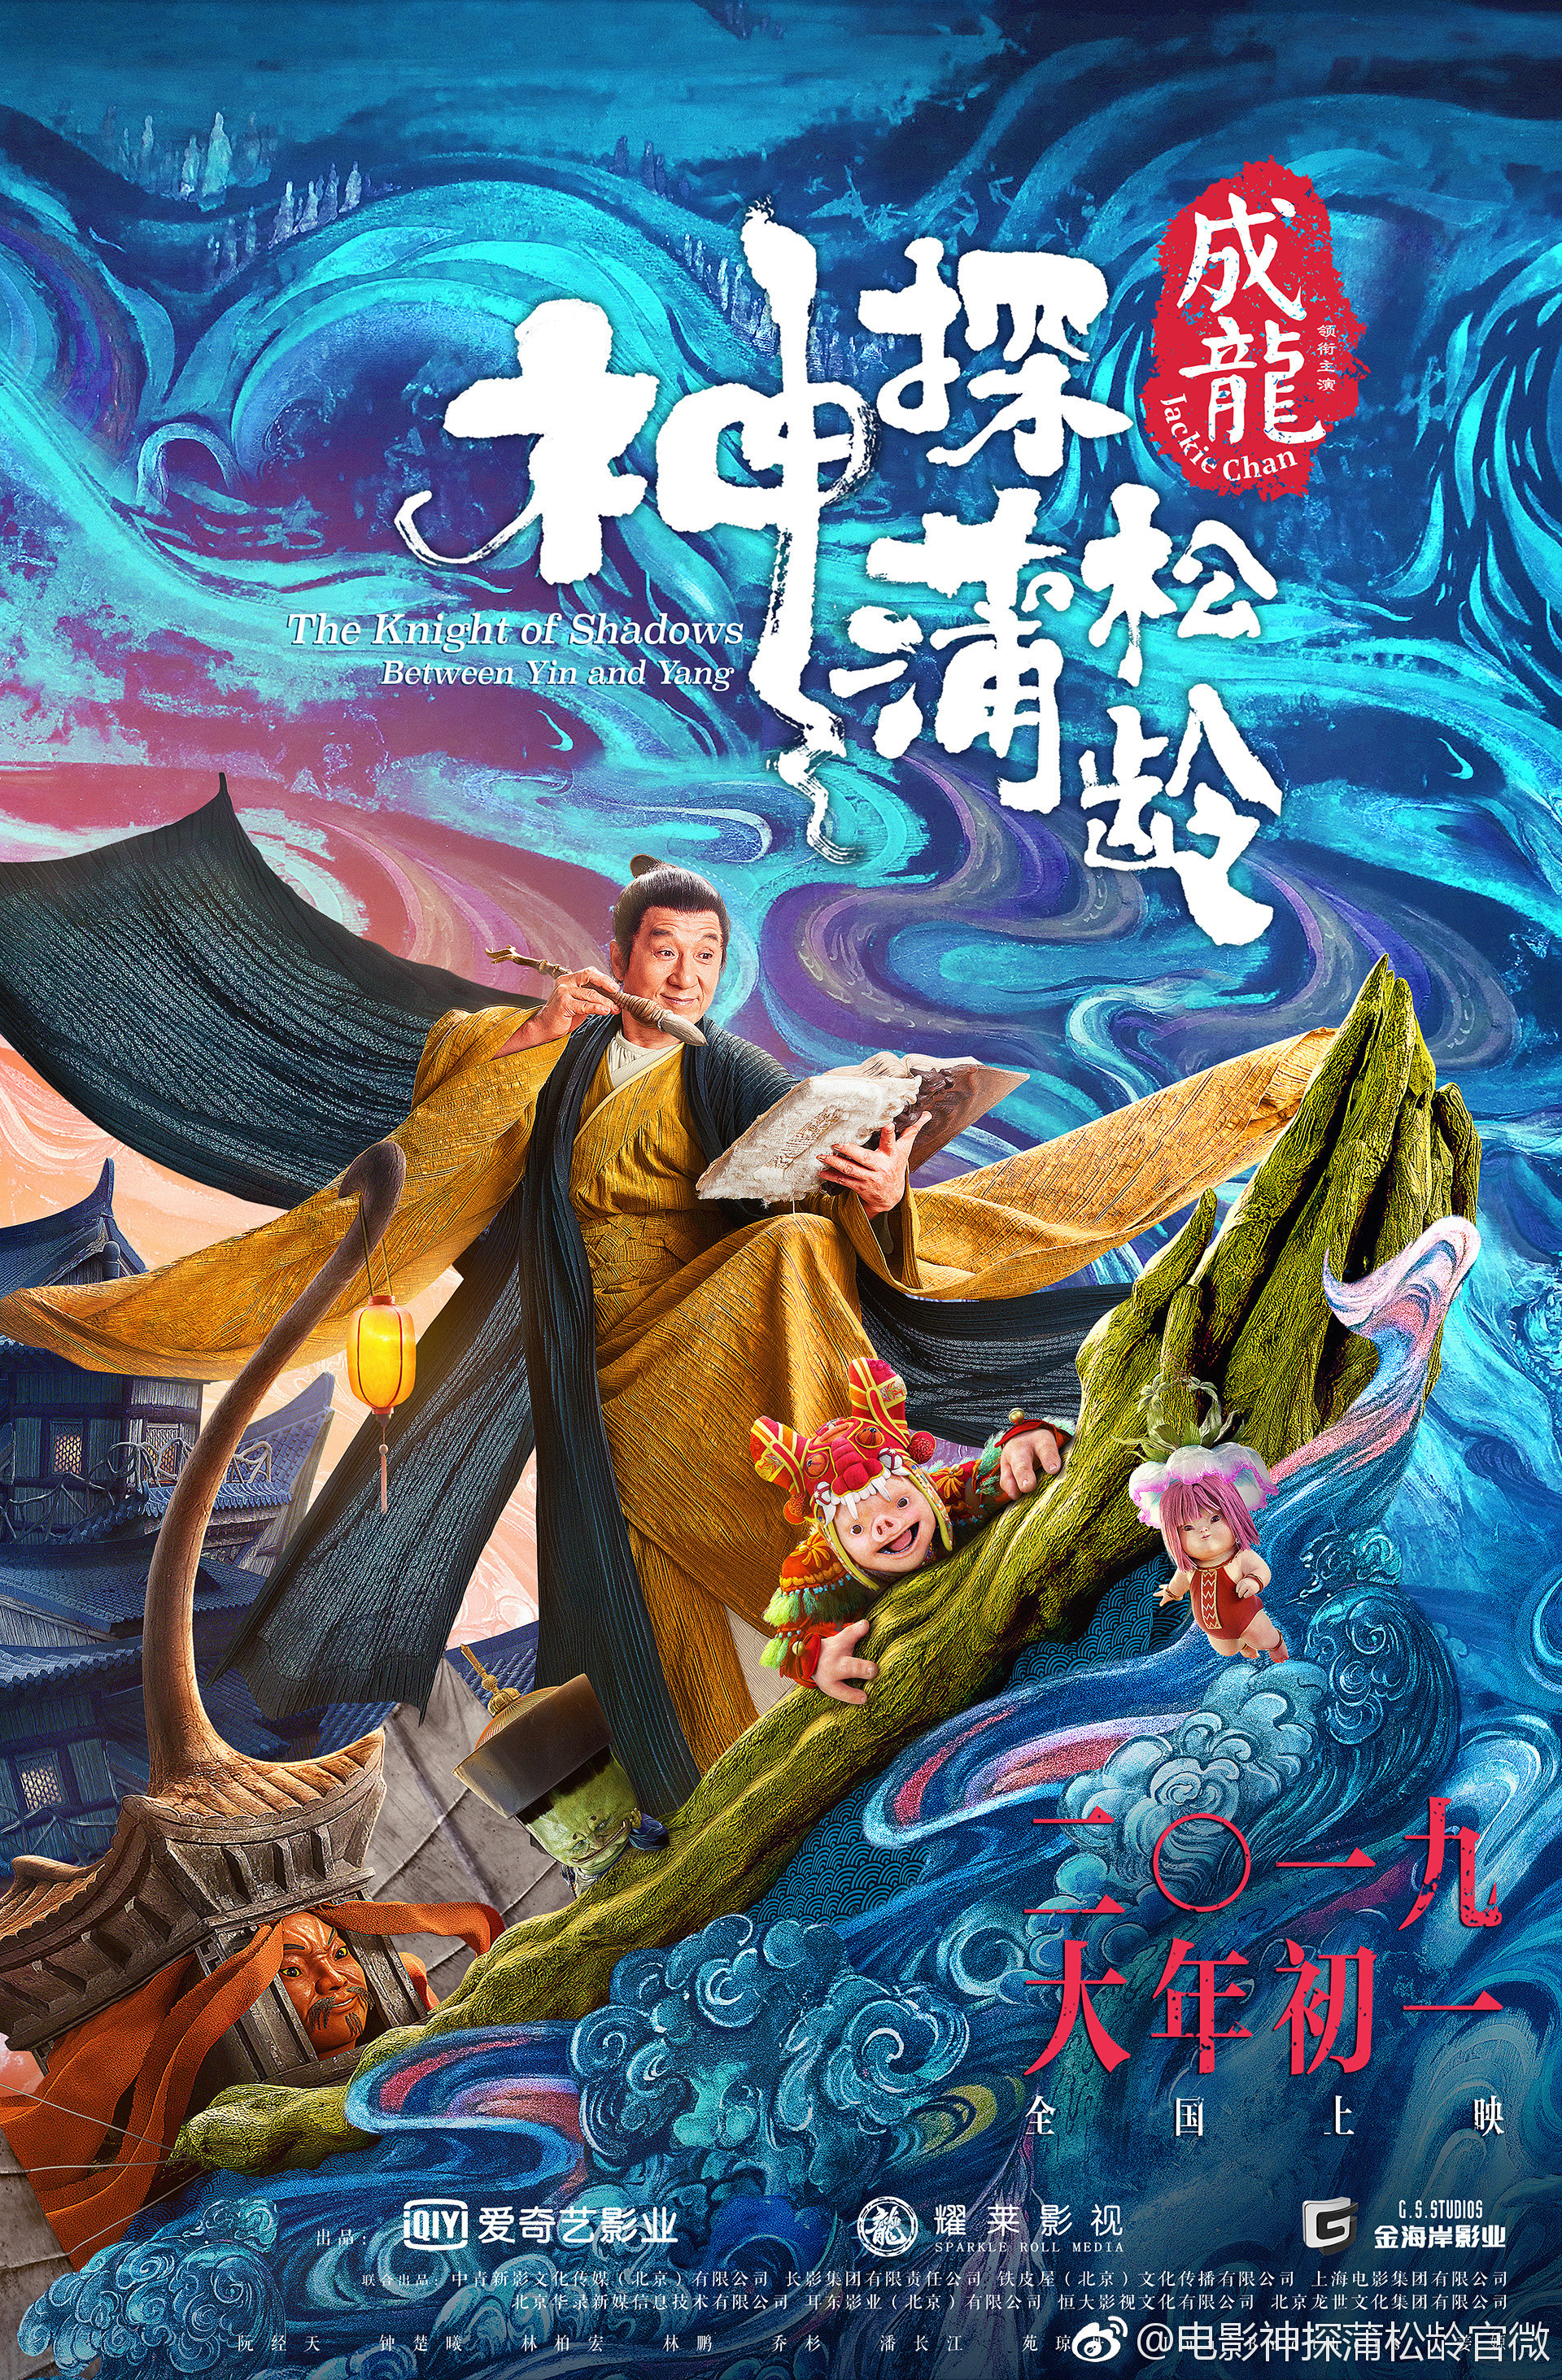 affiche du film The Knight of Shadows: Between Yin and Yang